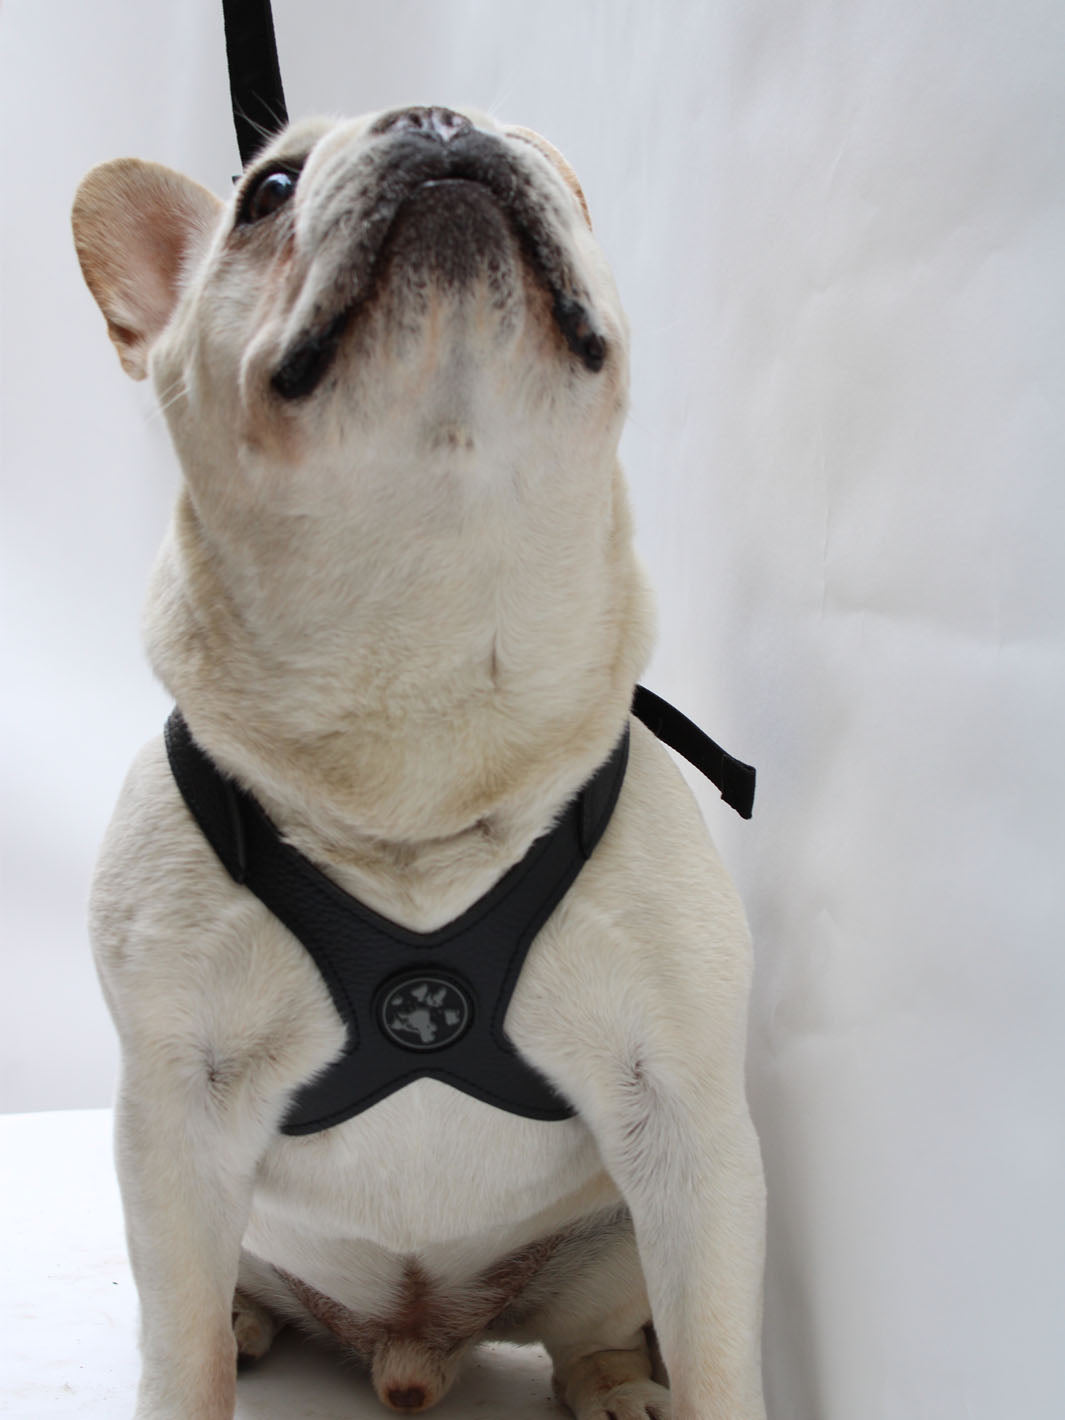 French bulldog looking upwards and wearing a black vegan leather harness by MAGNUS Canis.